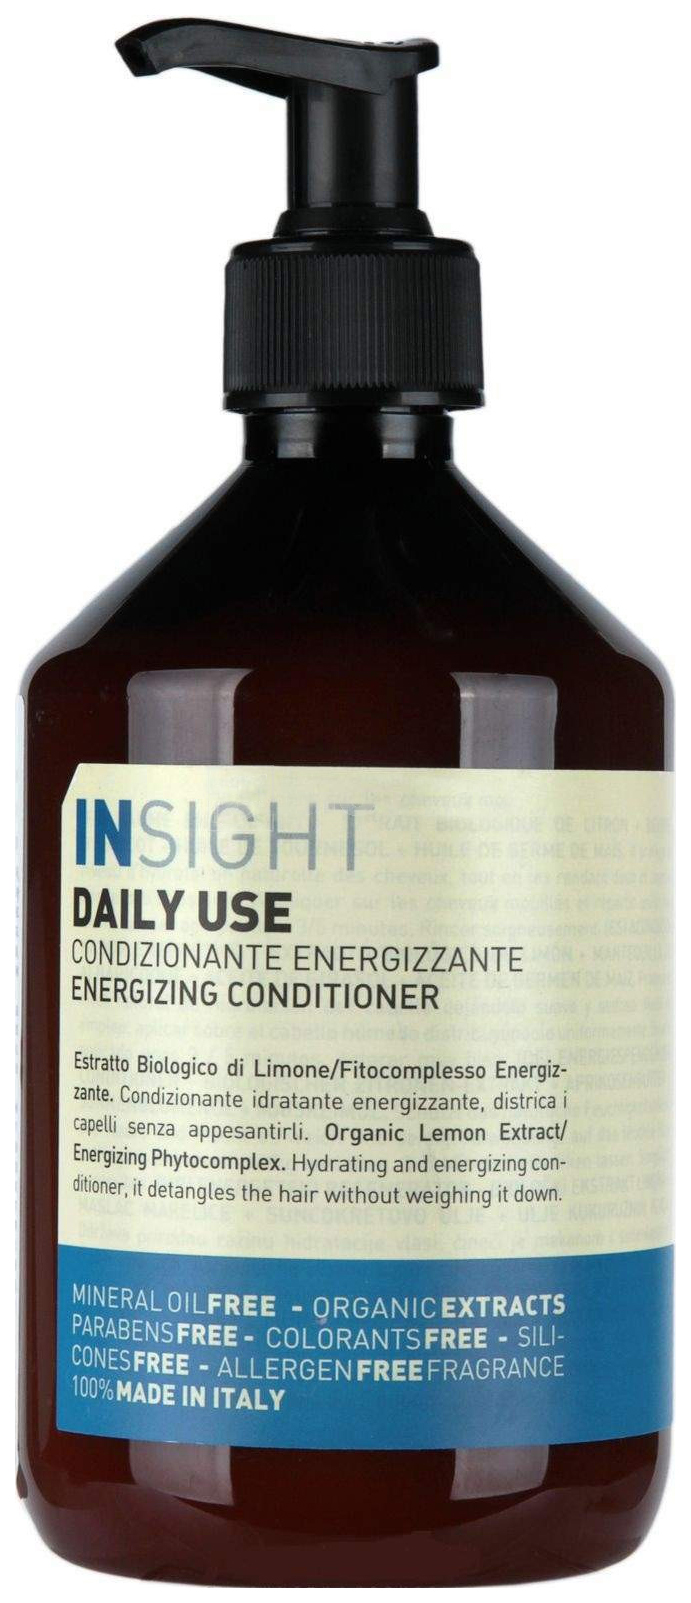 Insight daily use. Insight Daily use кондиционер. Кондиционер Insight Daily use 100ил. Insight Energizing Conditioner. Инсайт Дейли юз шампунь.